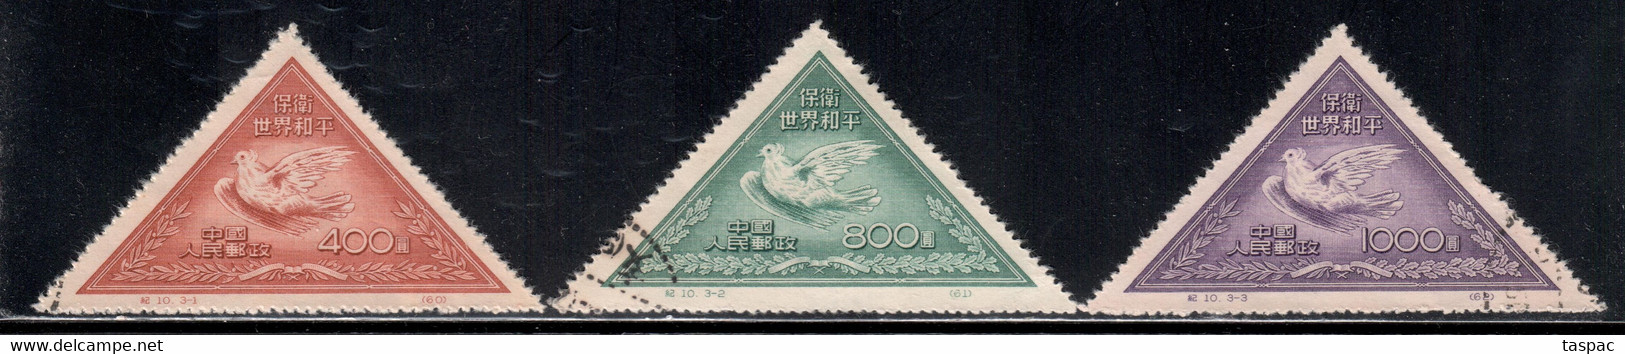 China P.R. 1951 Mi# 113-115 II Used - Reprints - Picasso Dove - Official Reprints